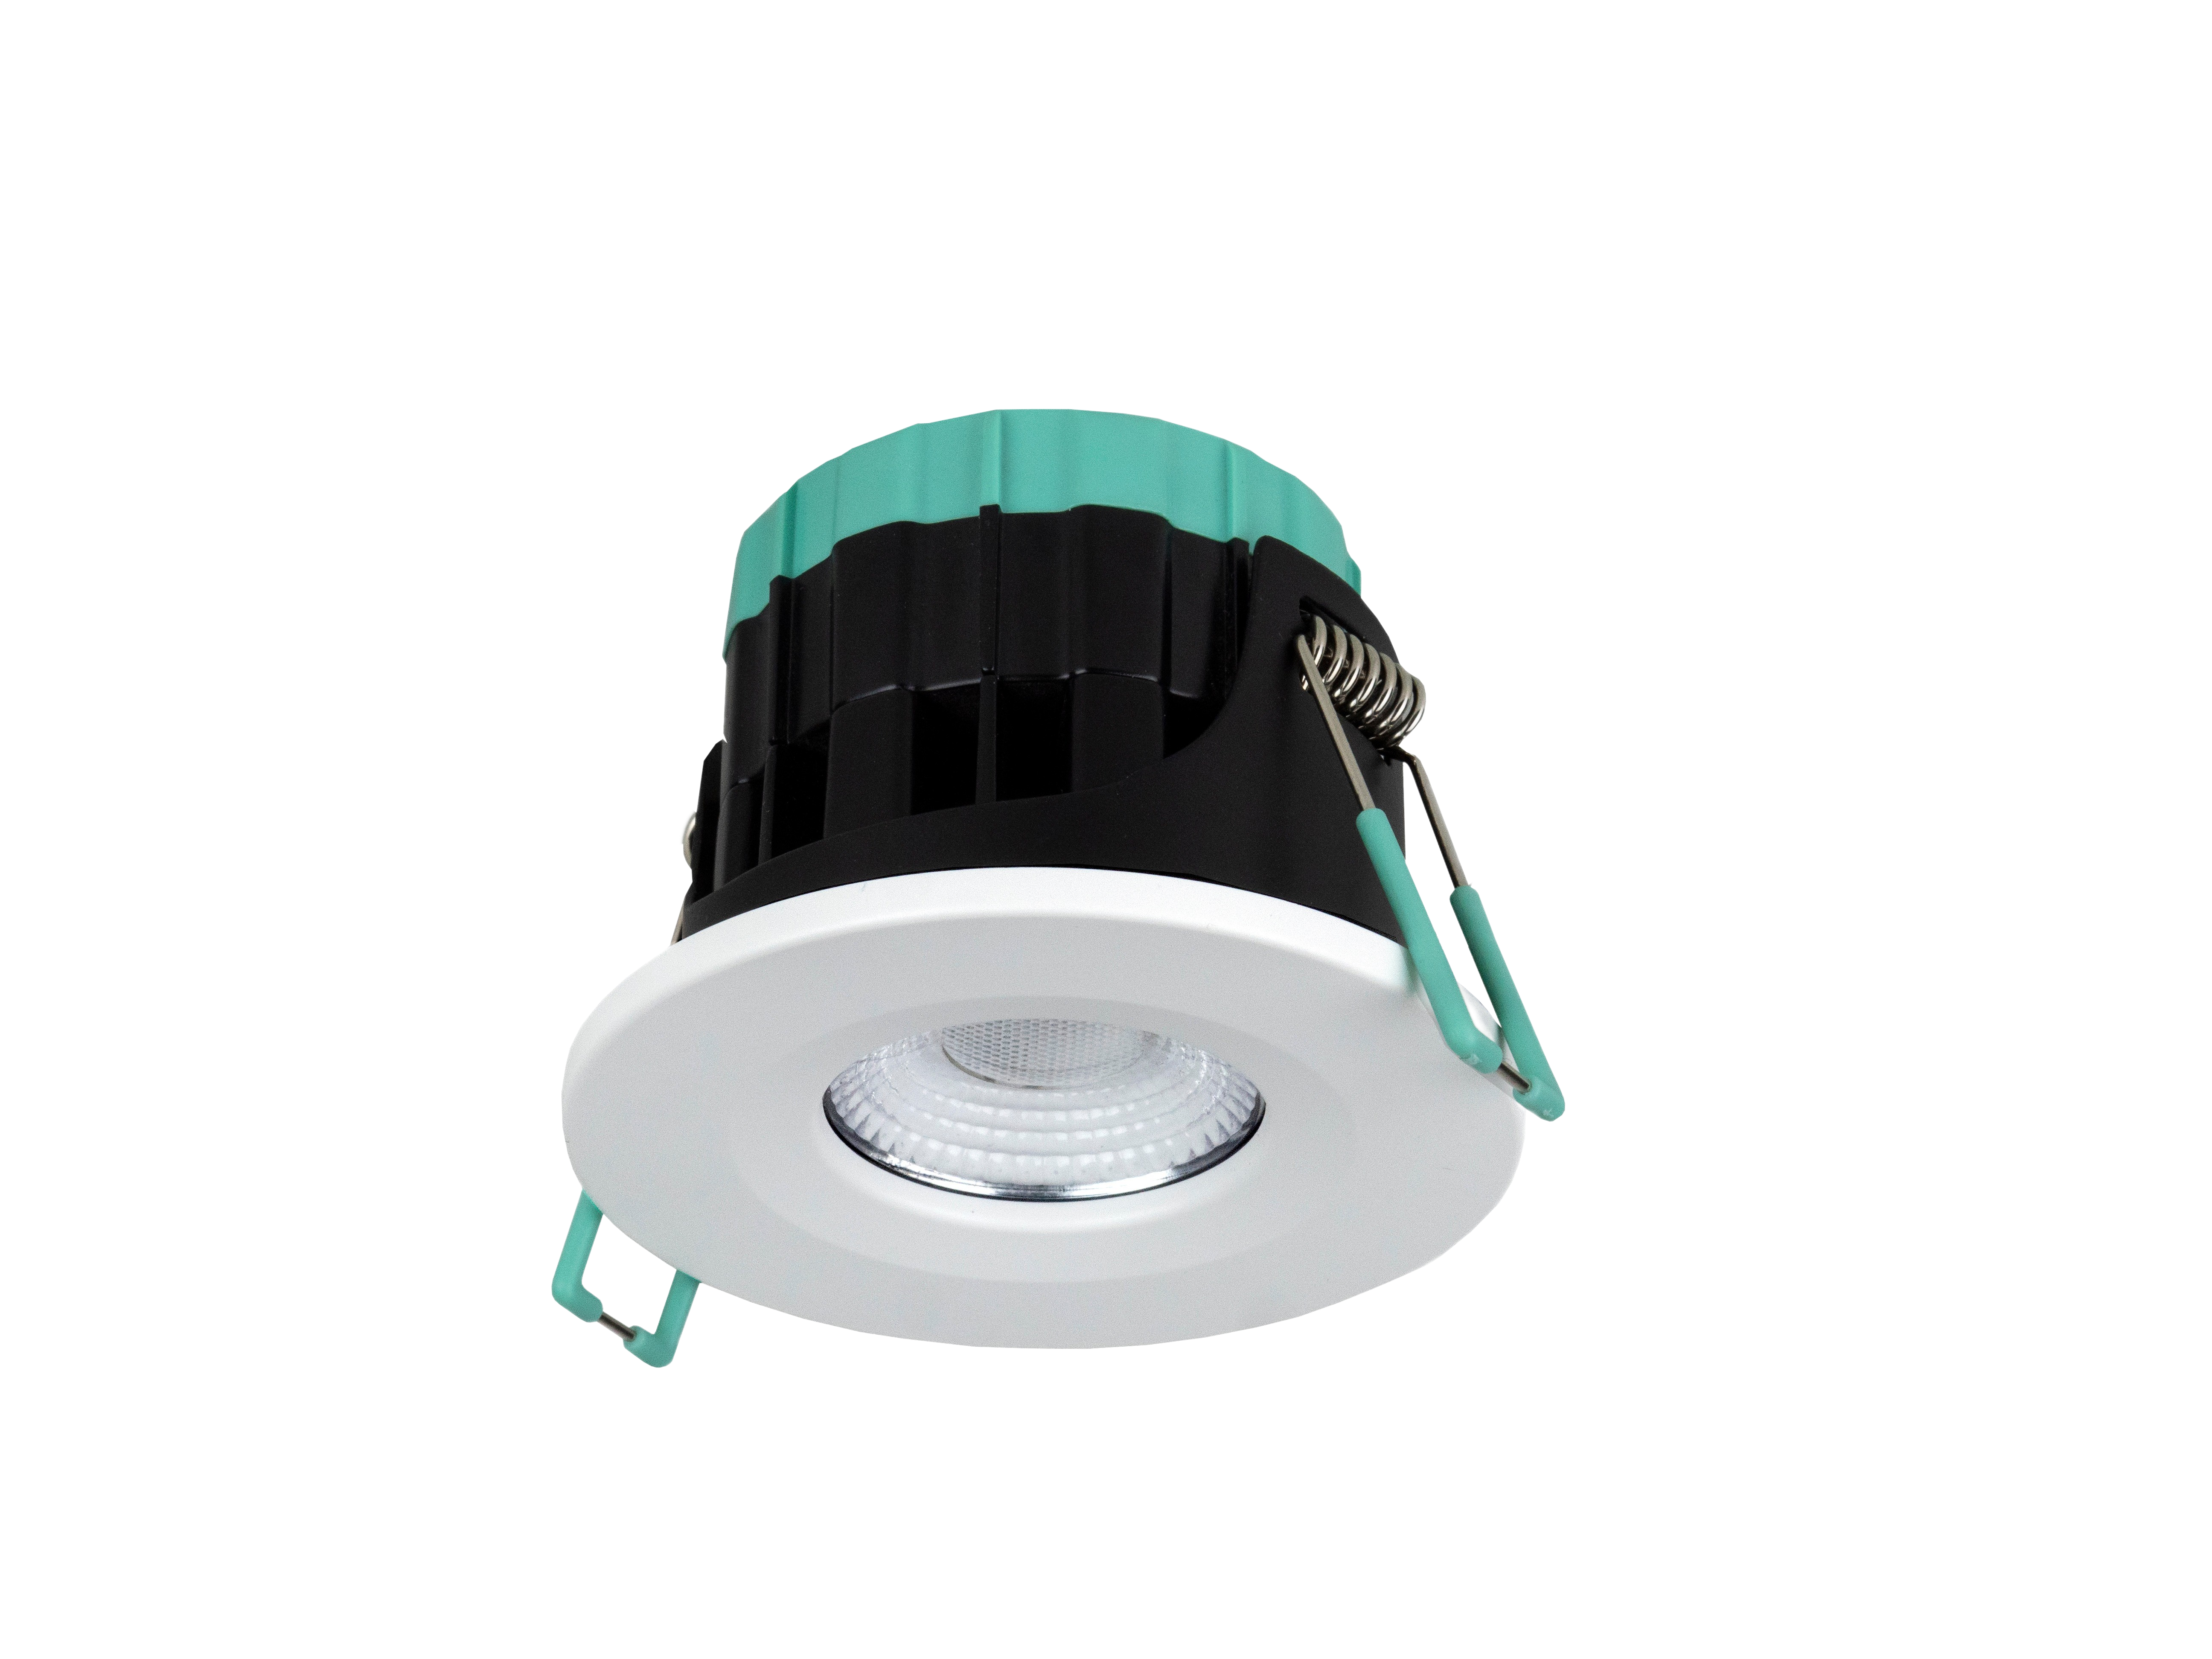 ULTIMUM CONNECT 7W IP65 WIFI Tunable Fire Rated Downlight, white trim